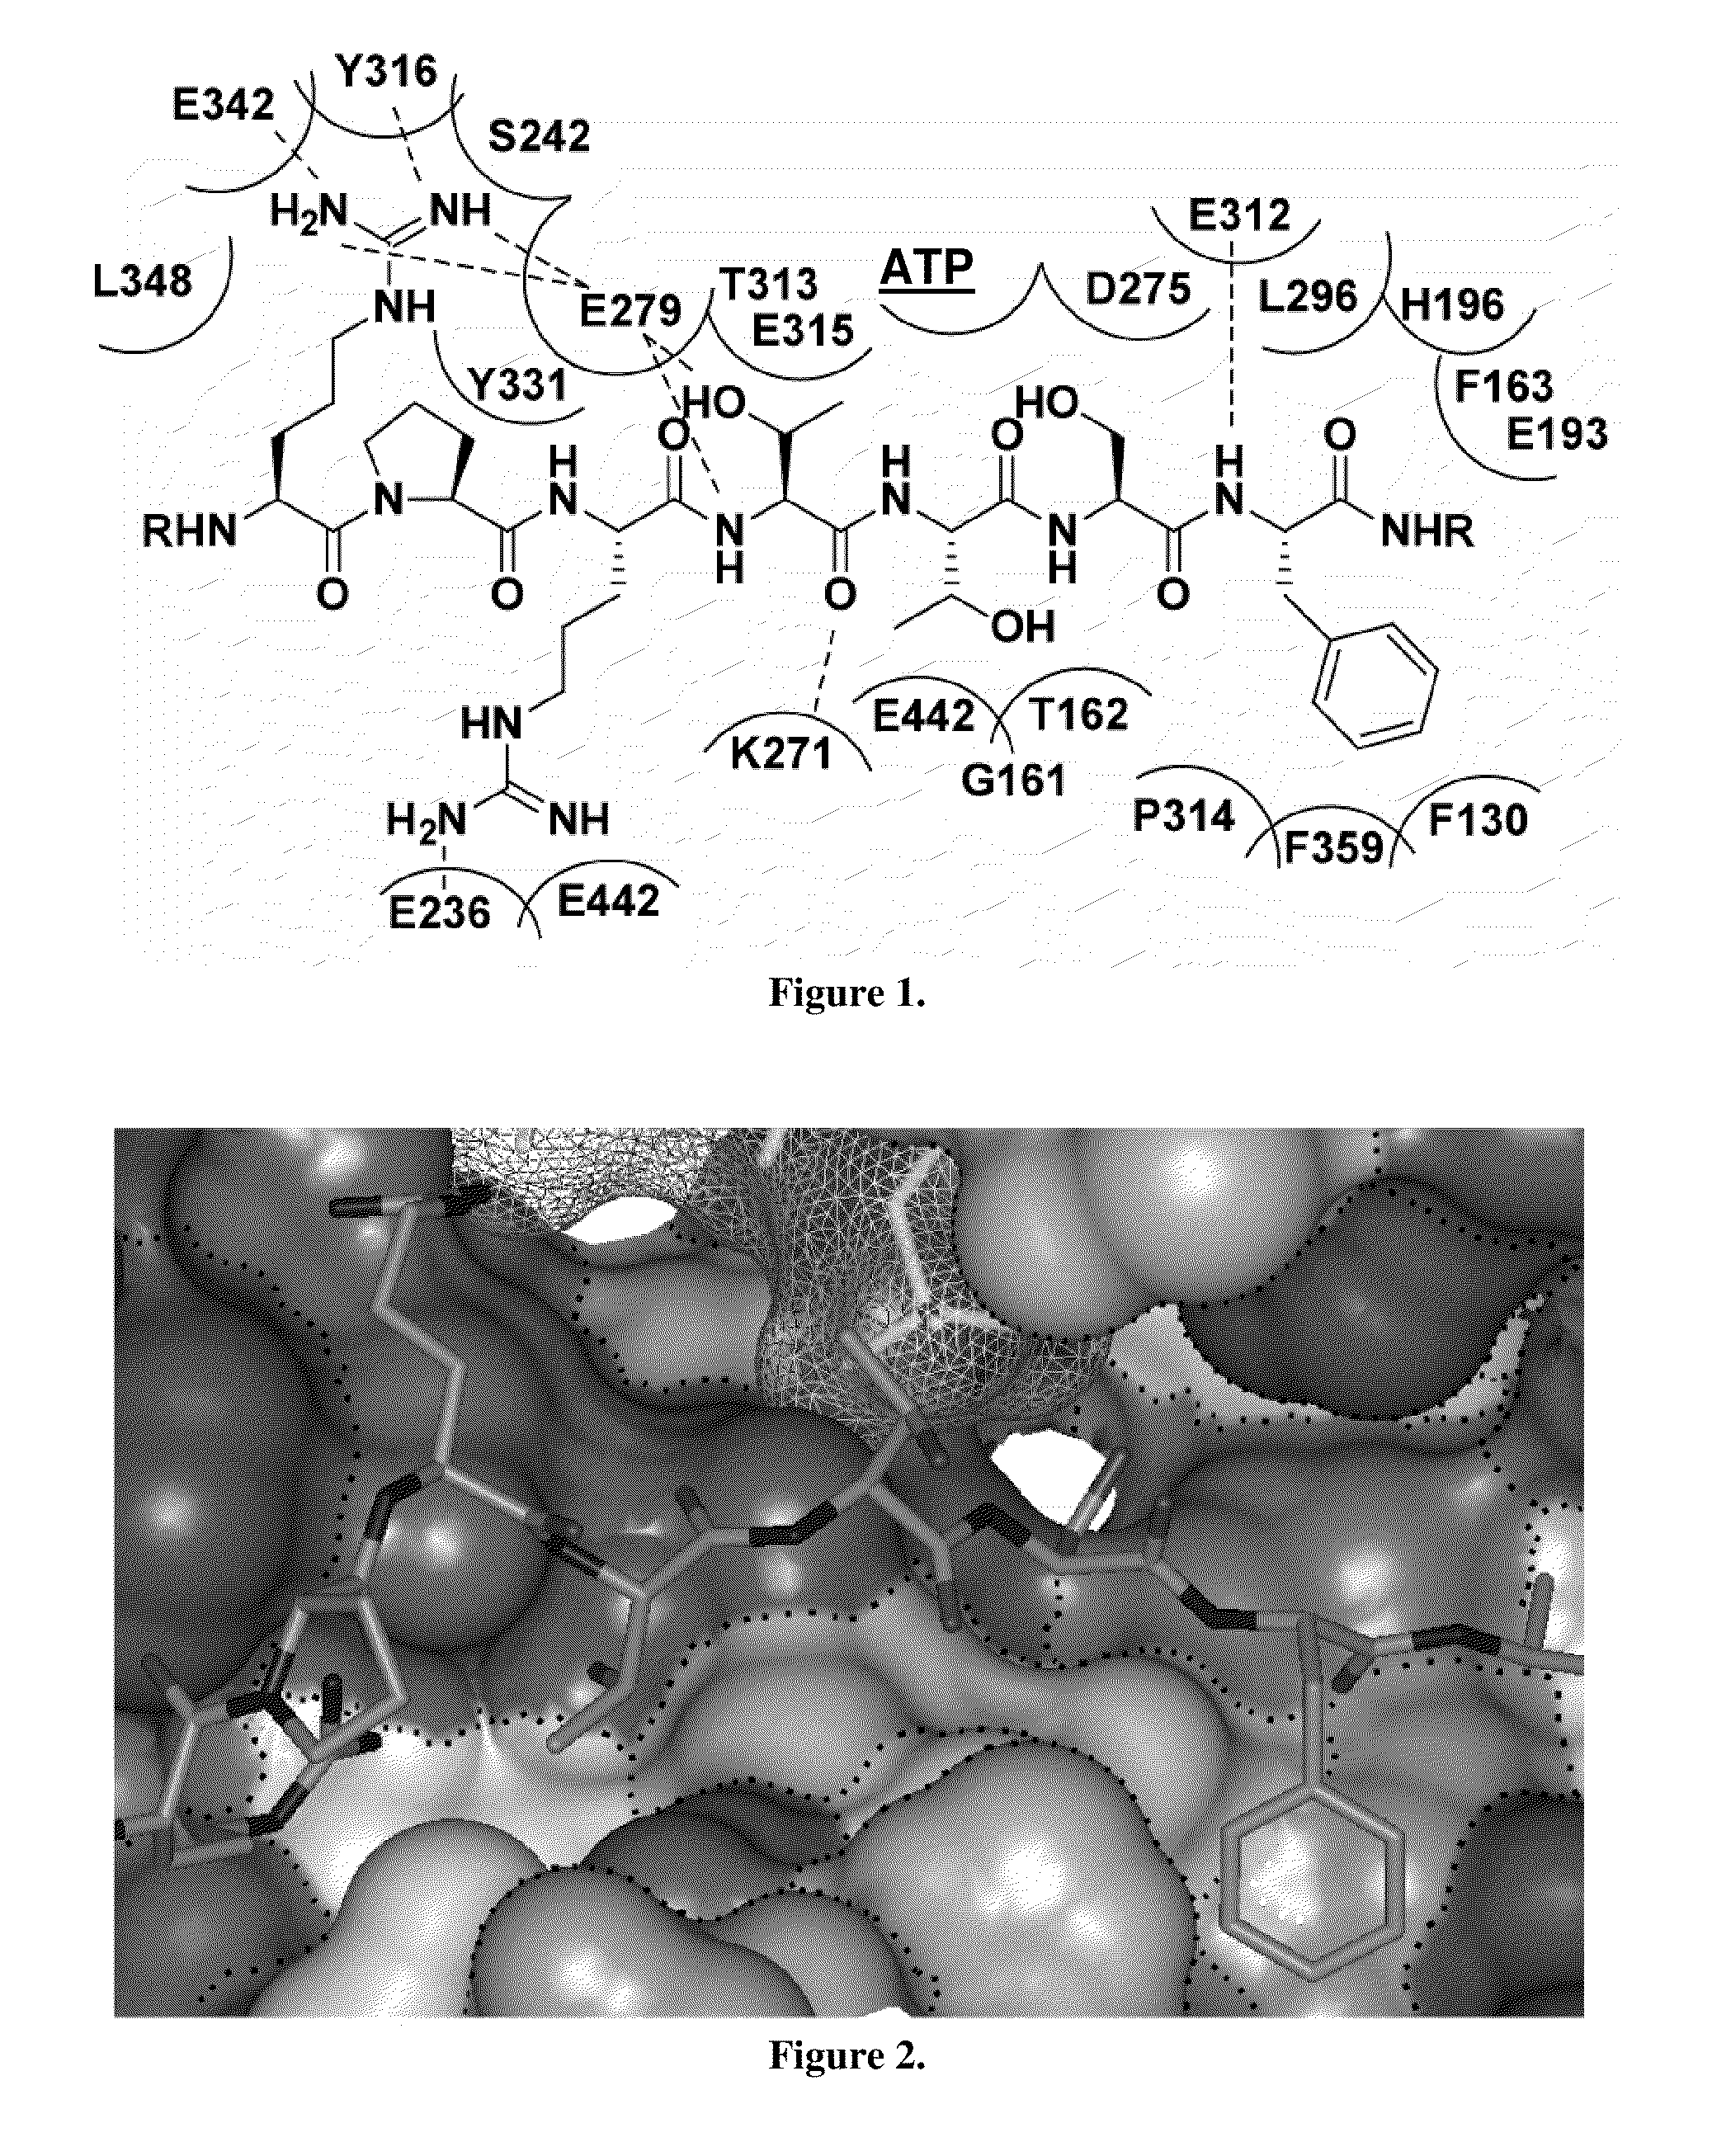 Substrate-mimetic akt inhibitor